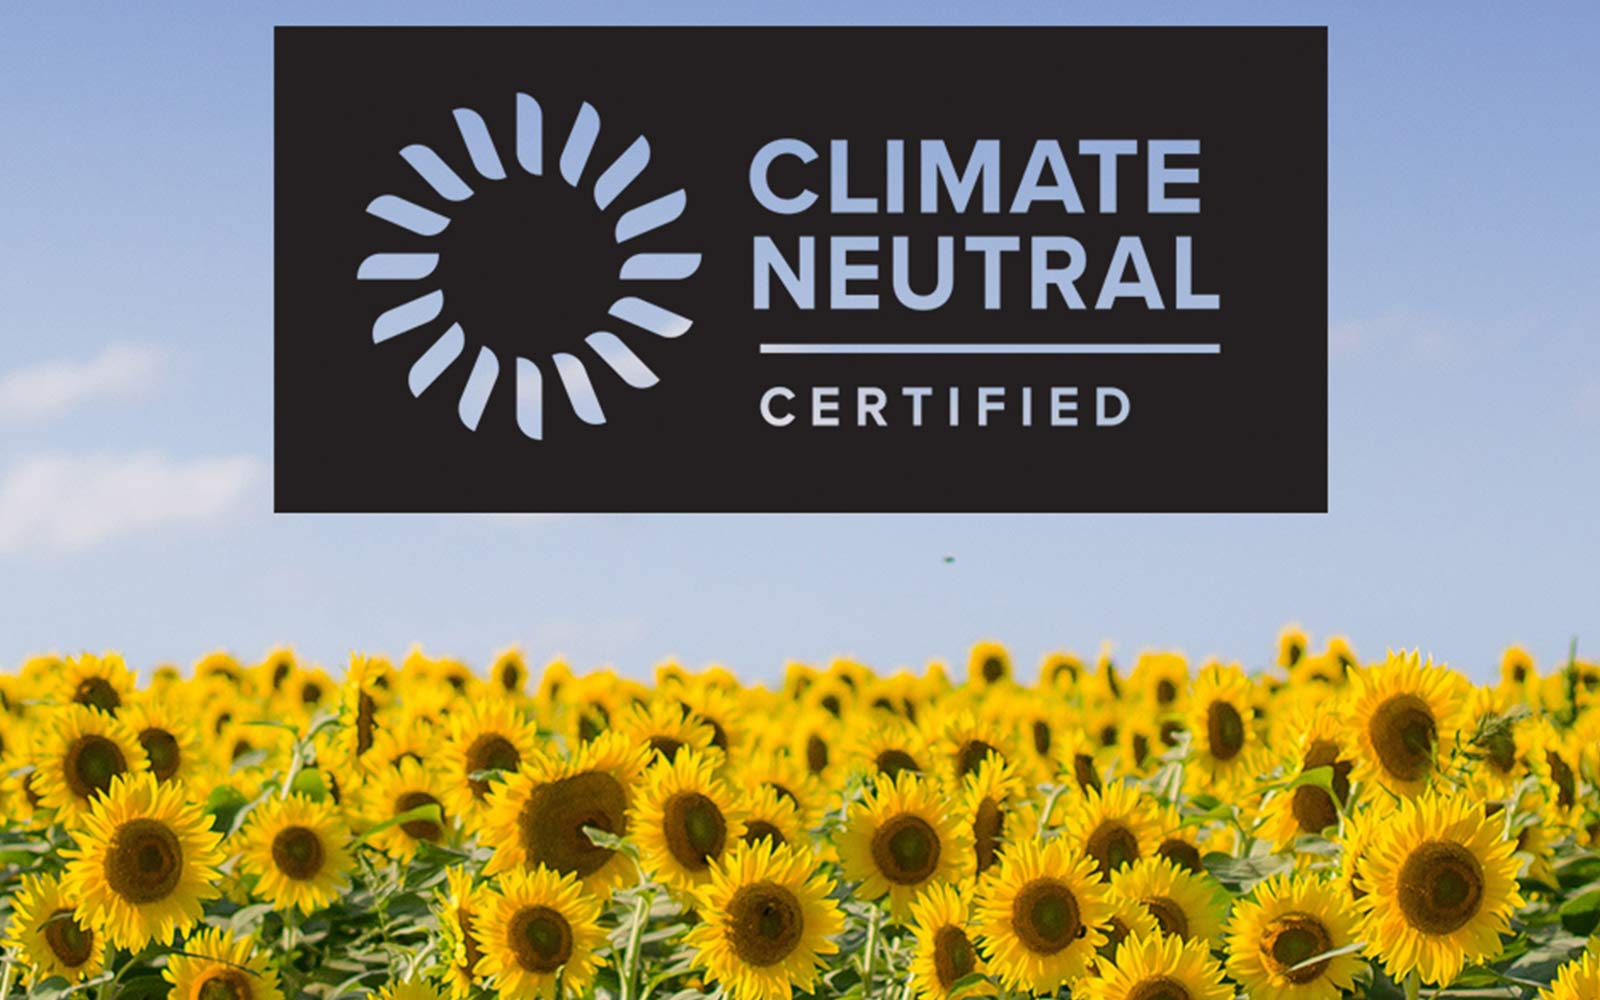 Today We are Climate Neutral Certified